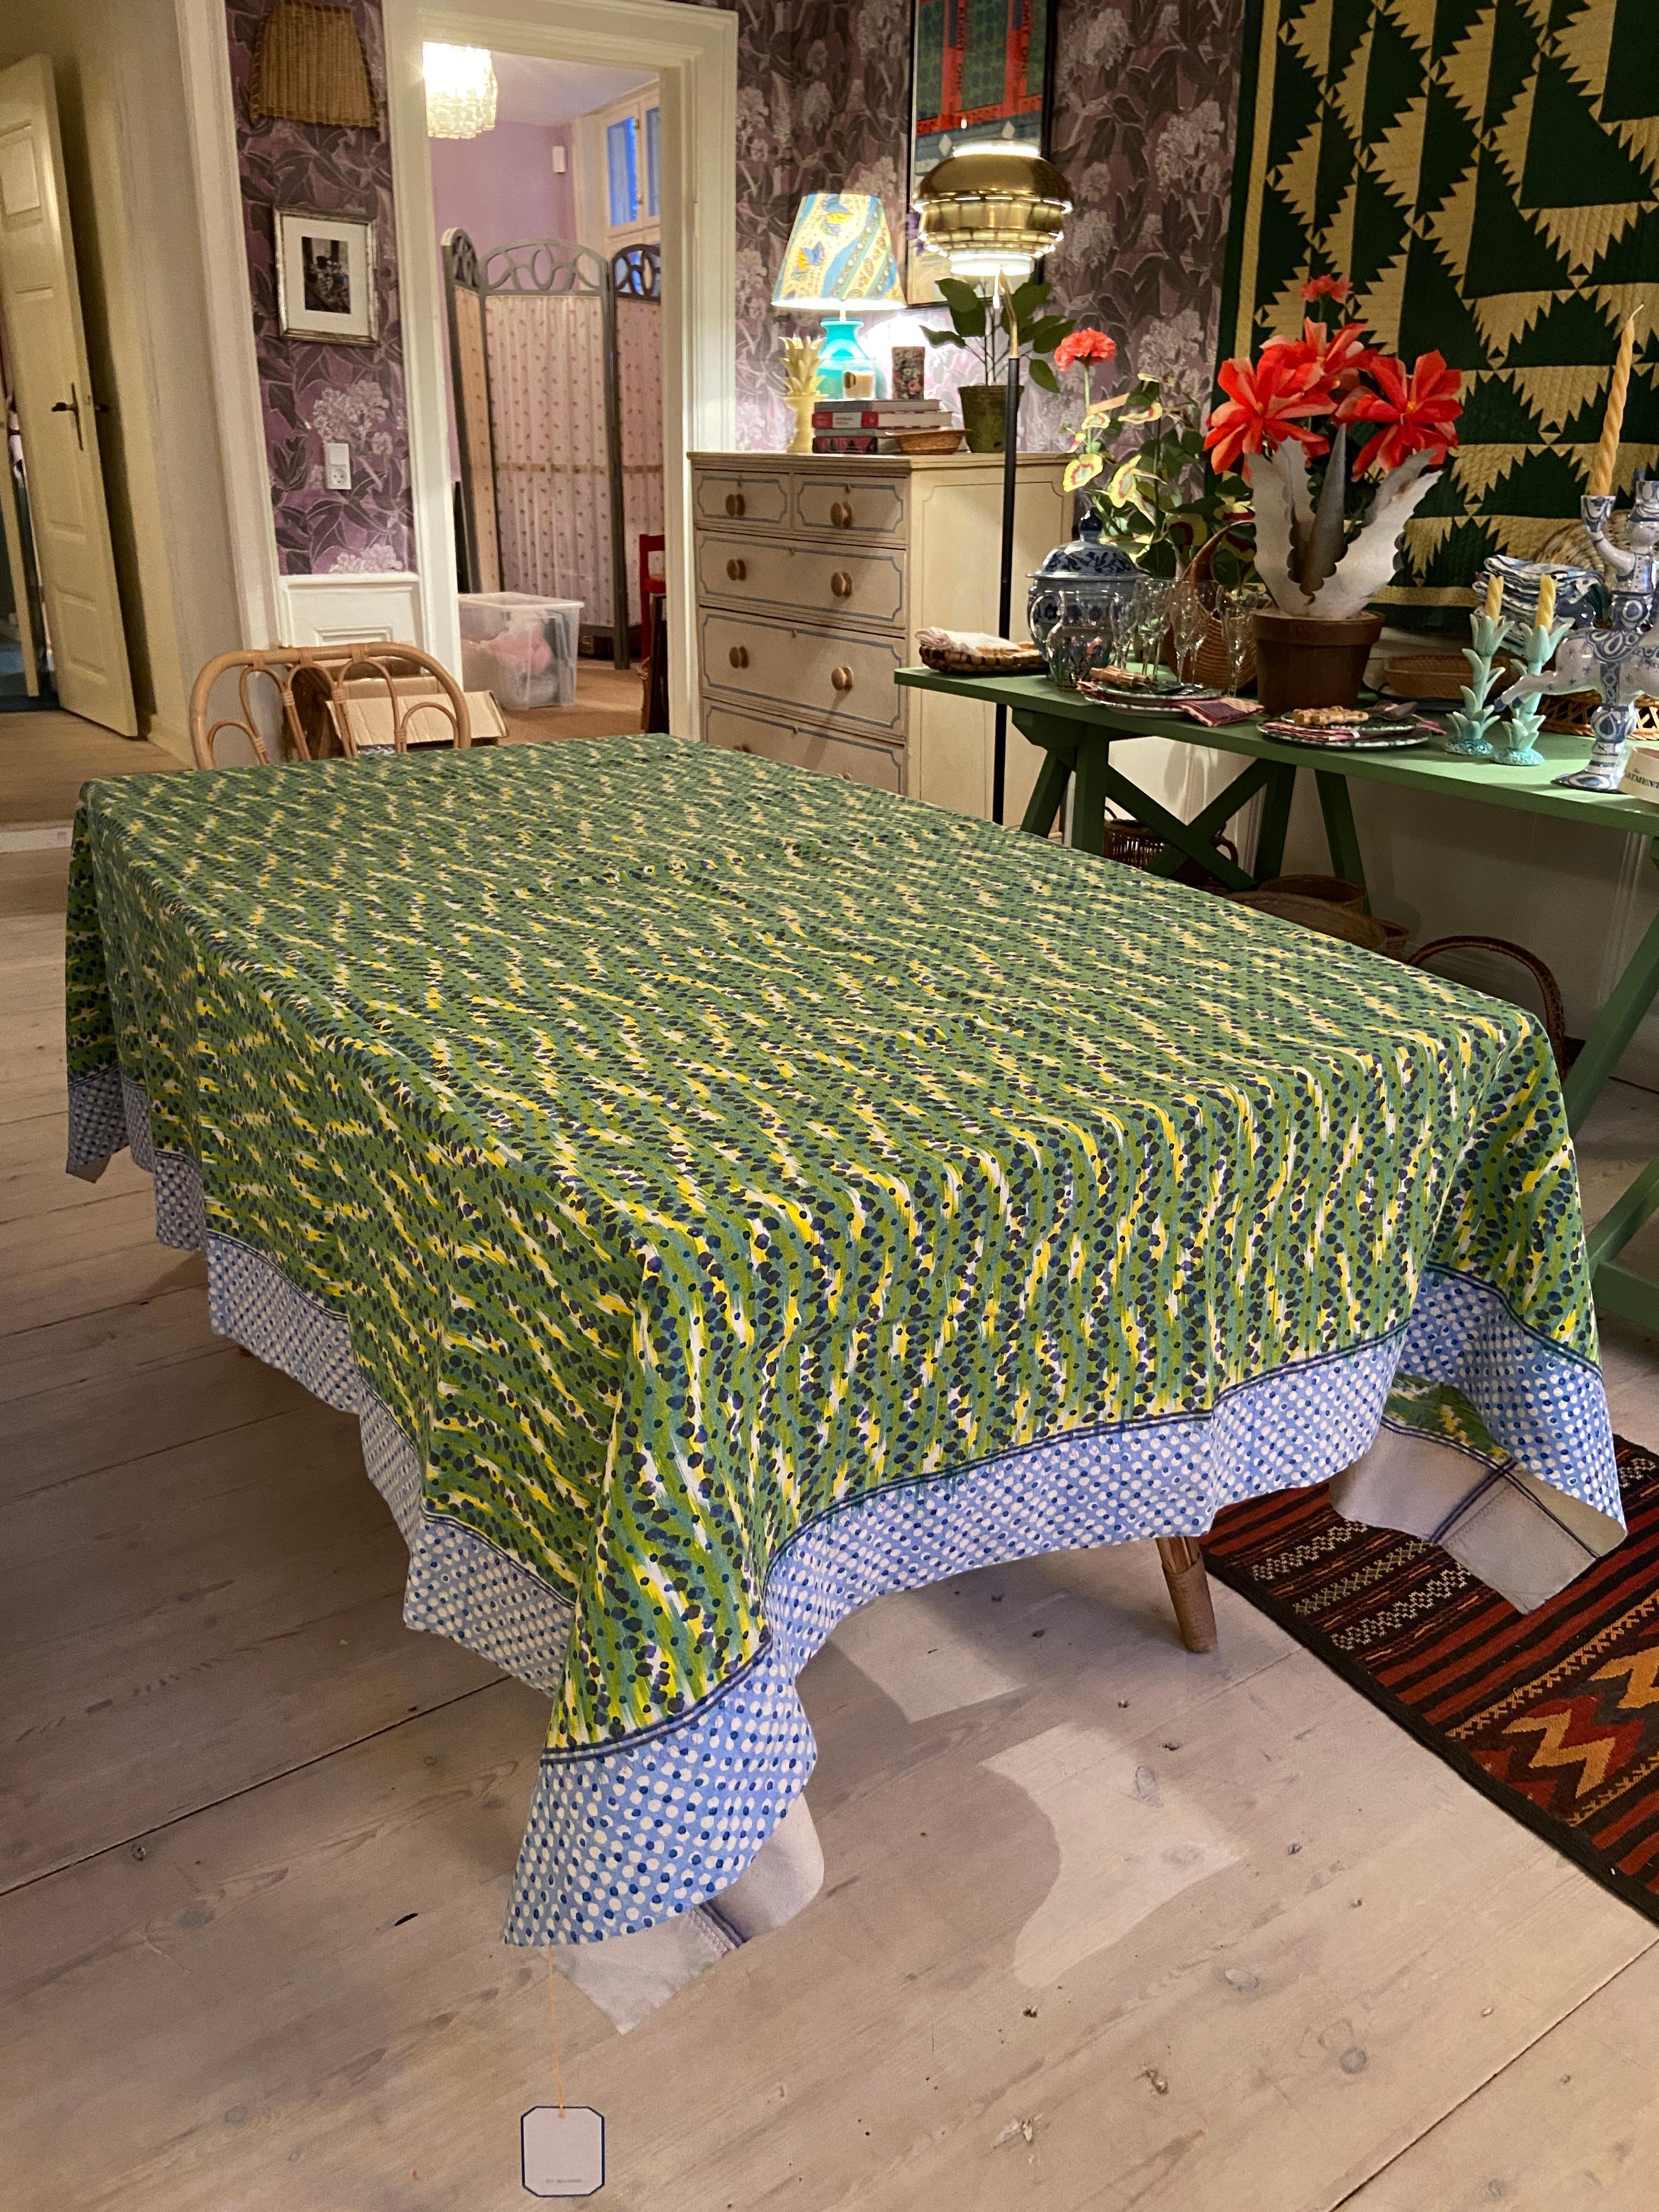 American Contemporary Gregory Parkinson Tablecloth Green Blue Ikat Hand-Blocked Patterns